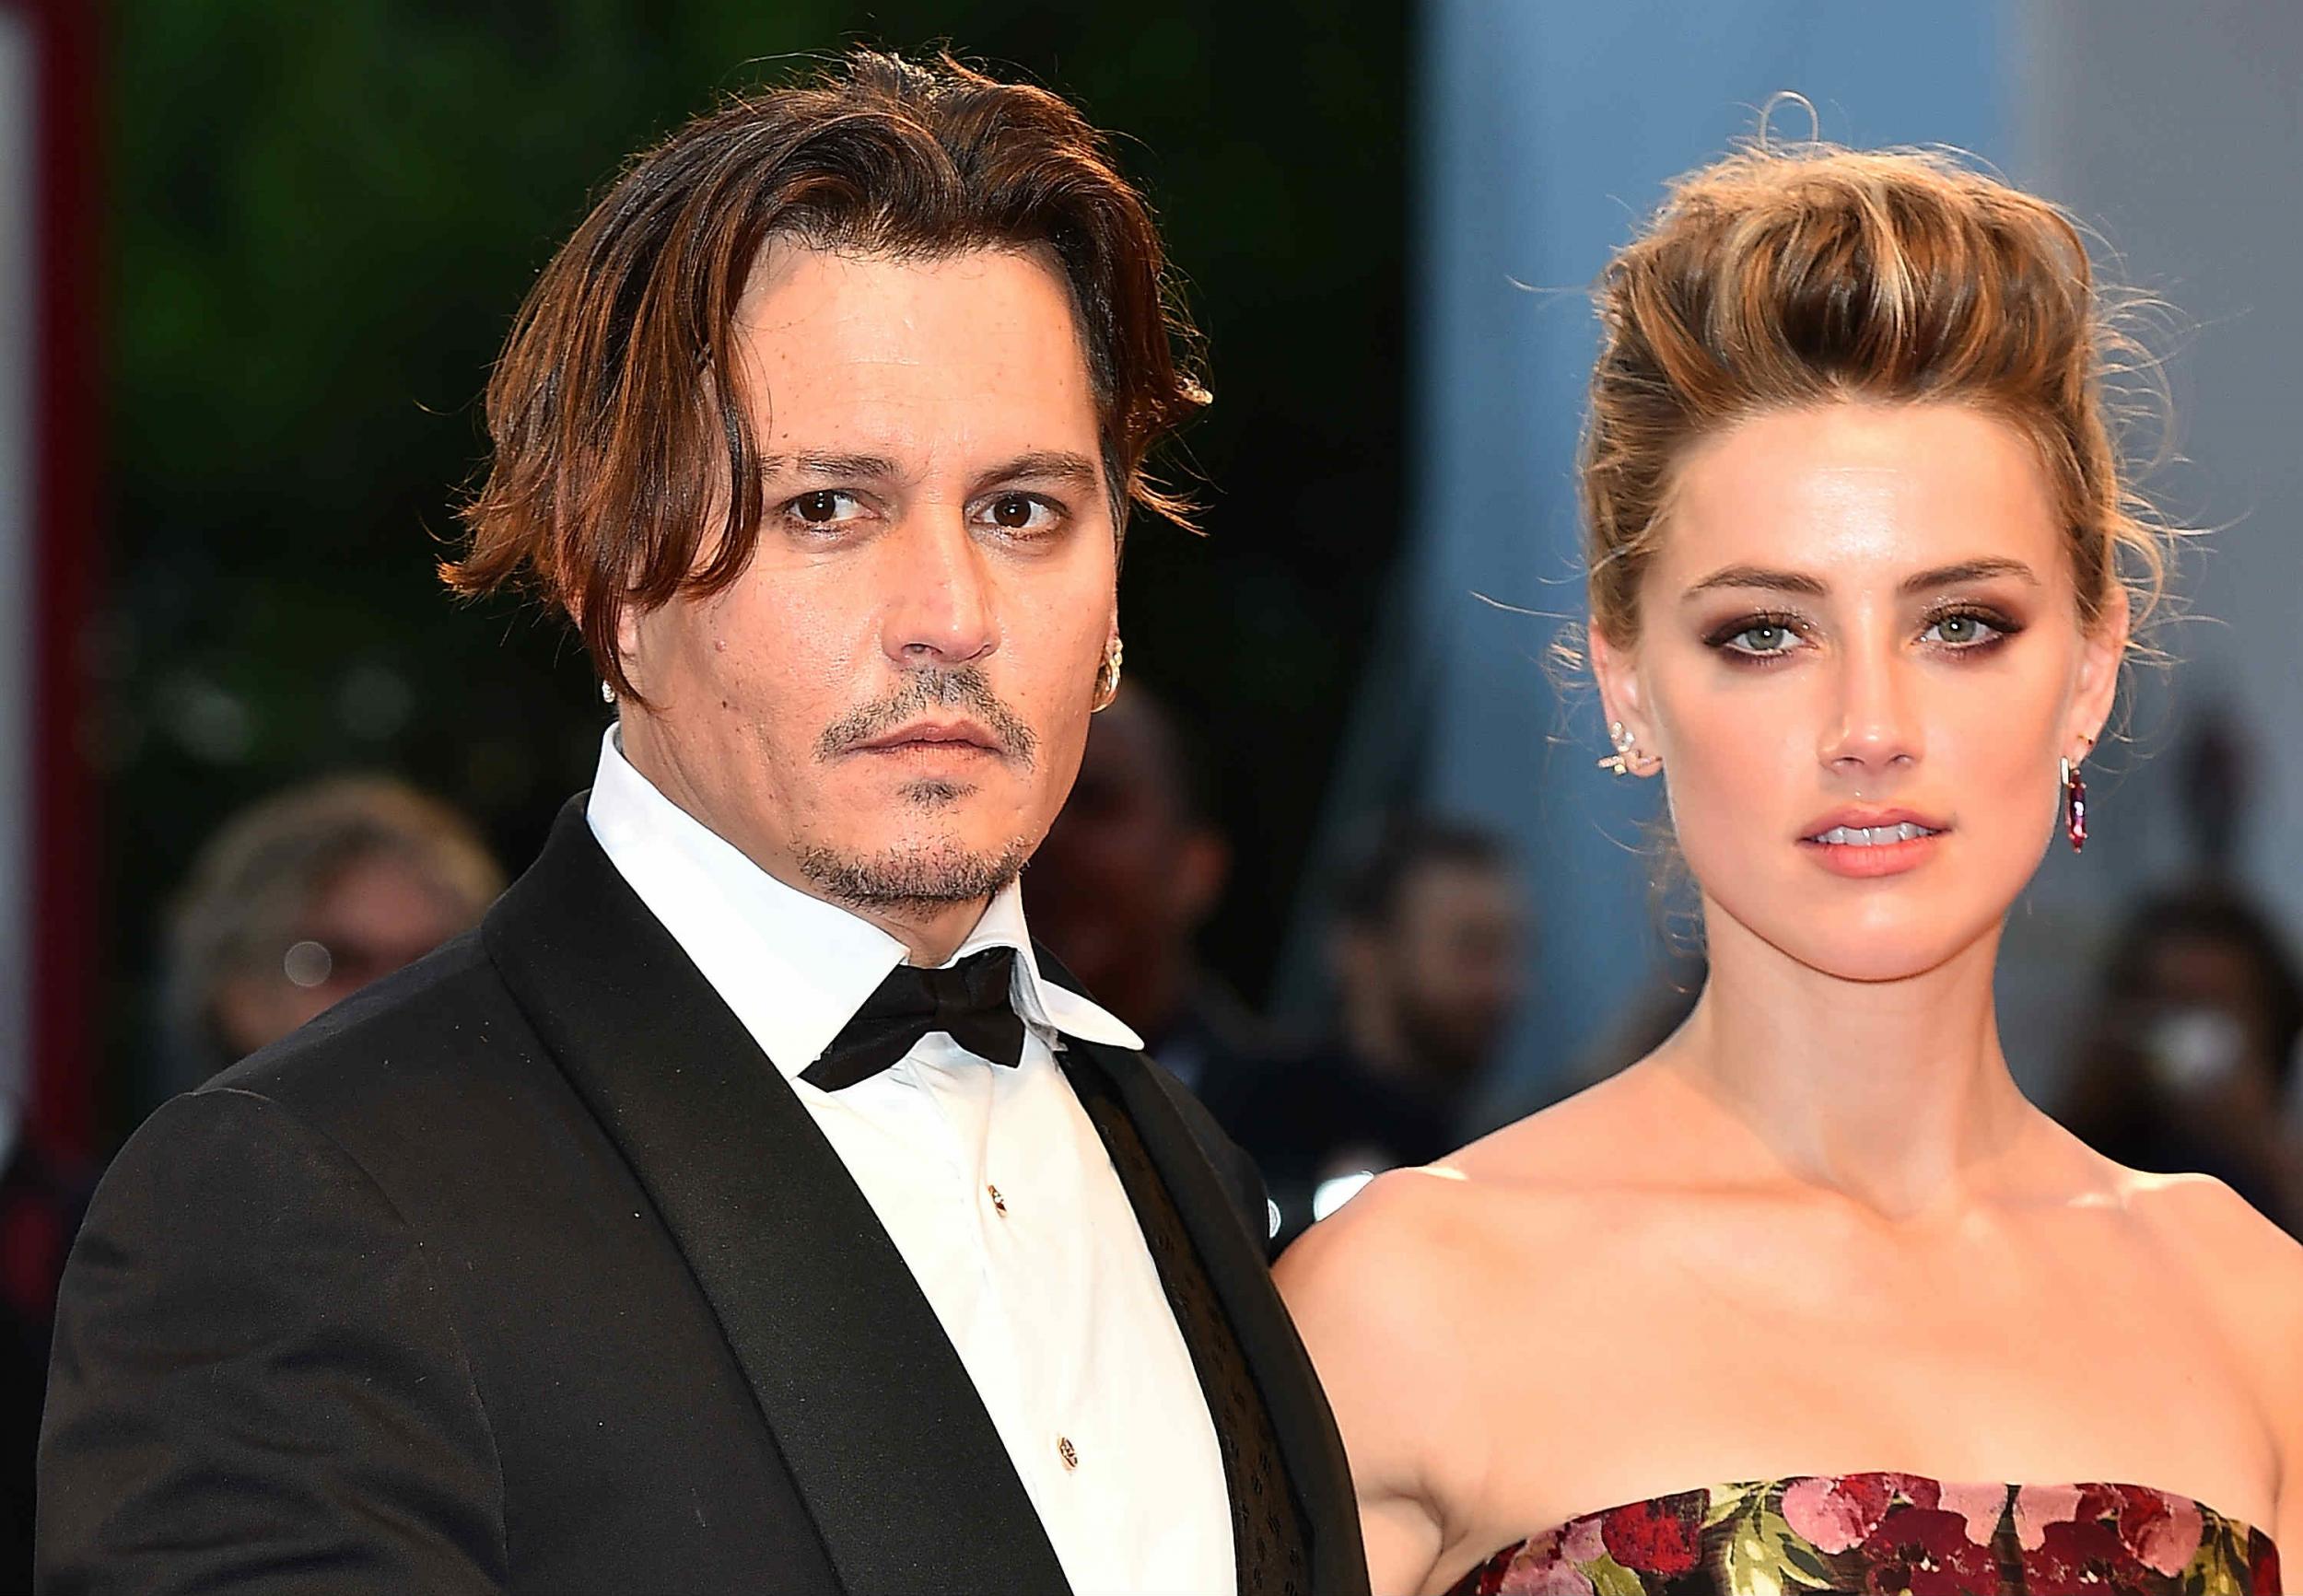 Celebrity Net Worth estimates Heard as having a fortune of approximately $9 million while it estimates Depp as having a fortune of roughly $400 million